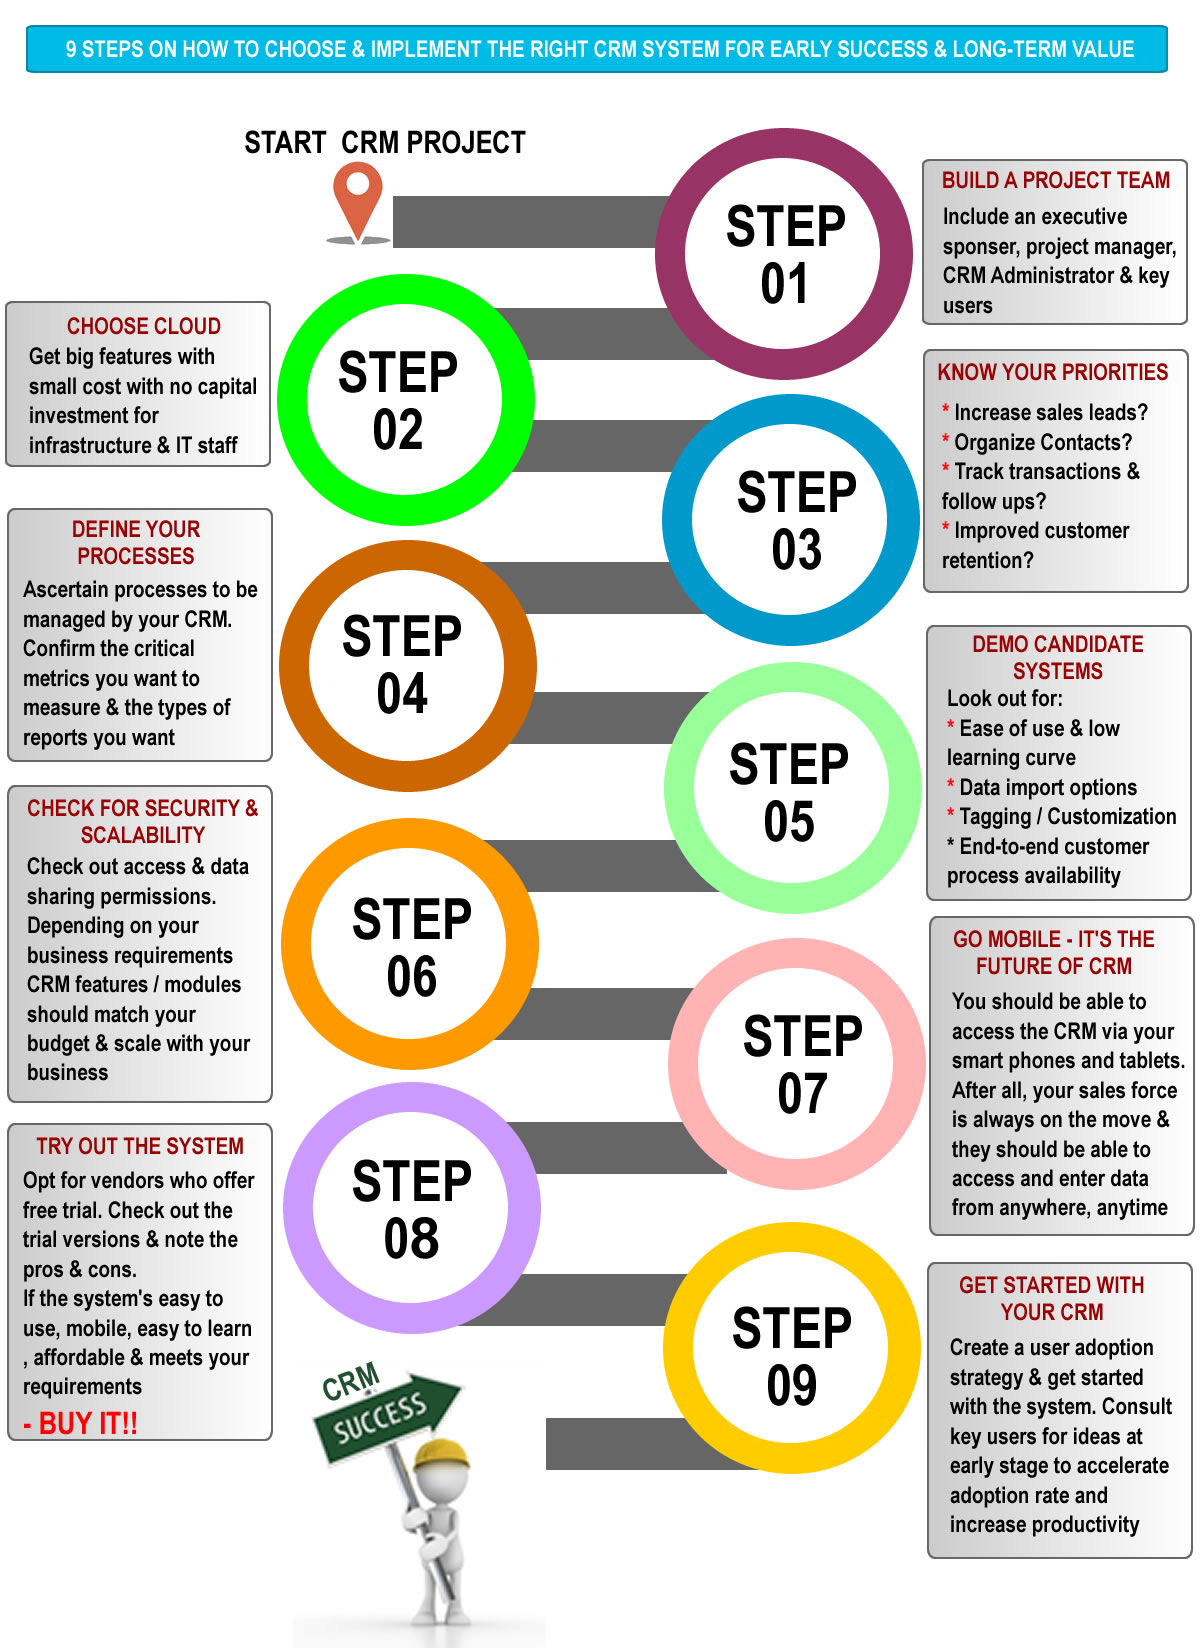 9 steps on implement a CRM System